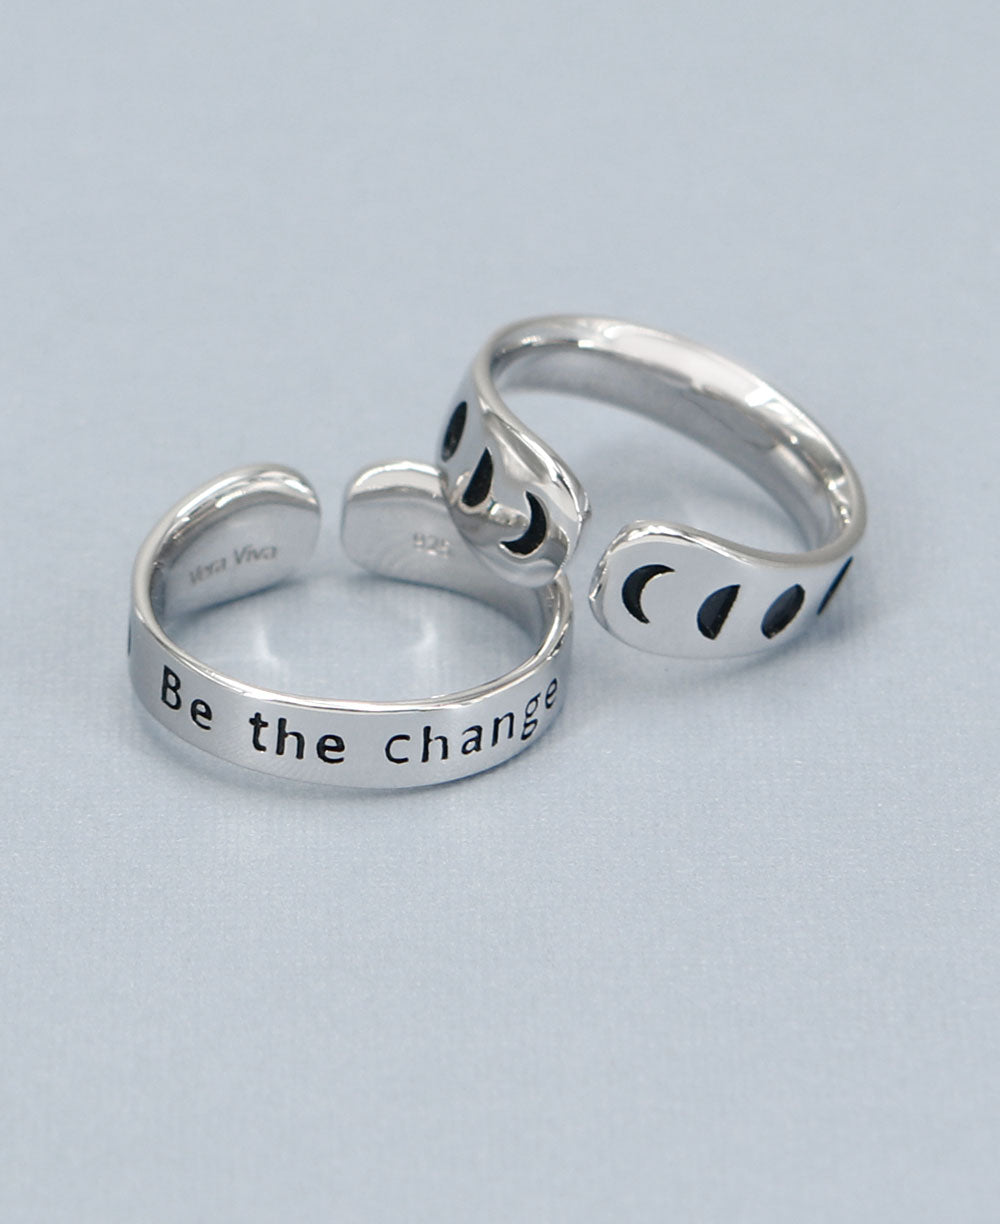 Be The Change Moon Phase Adjustable Inspirational Sterling Silver Ring - Rings